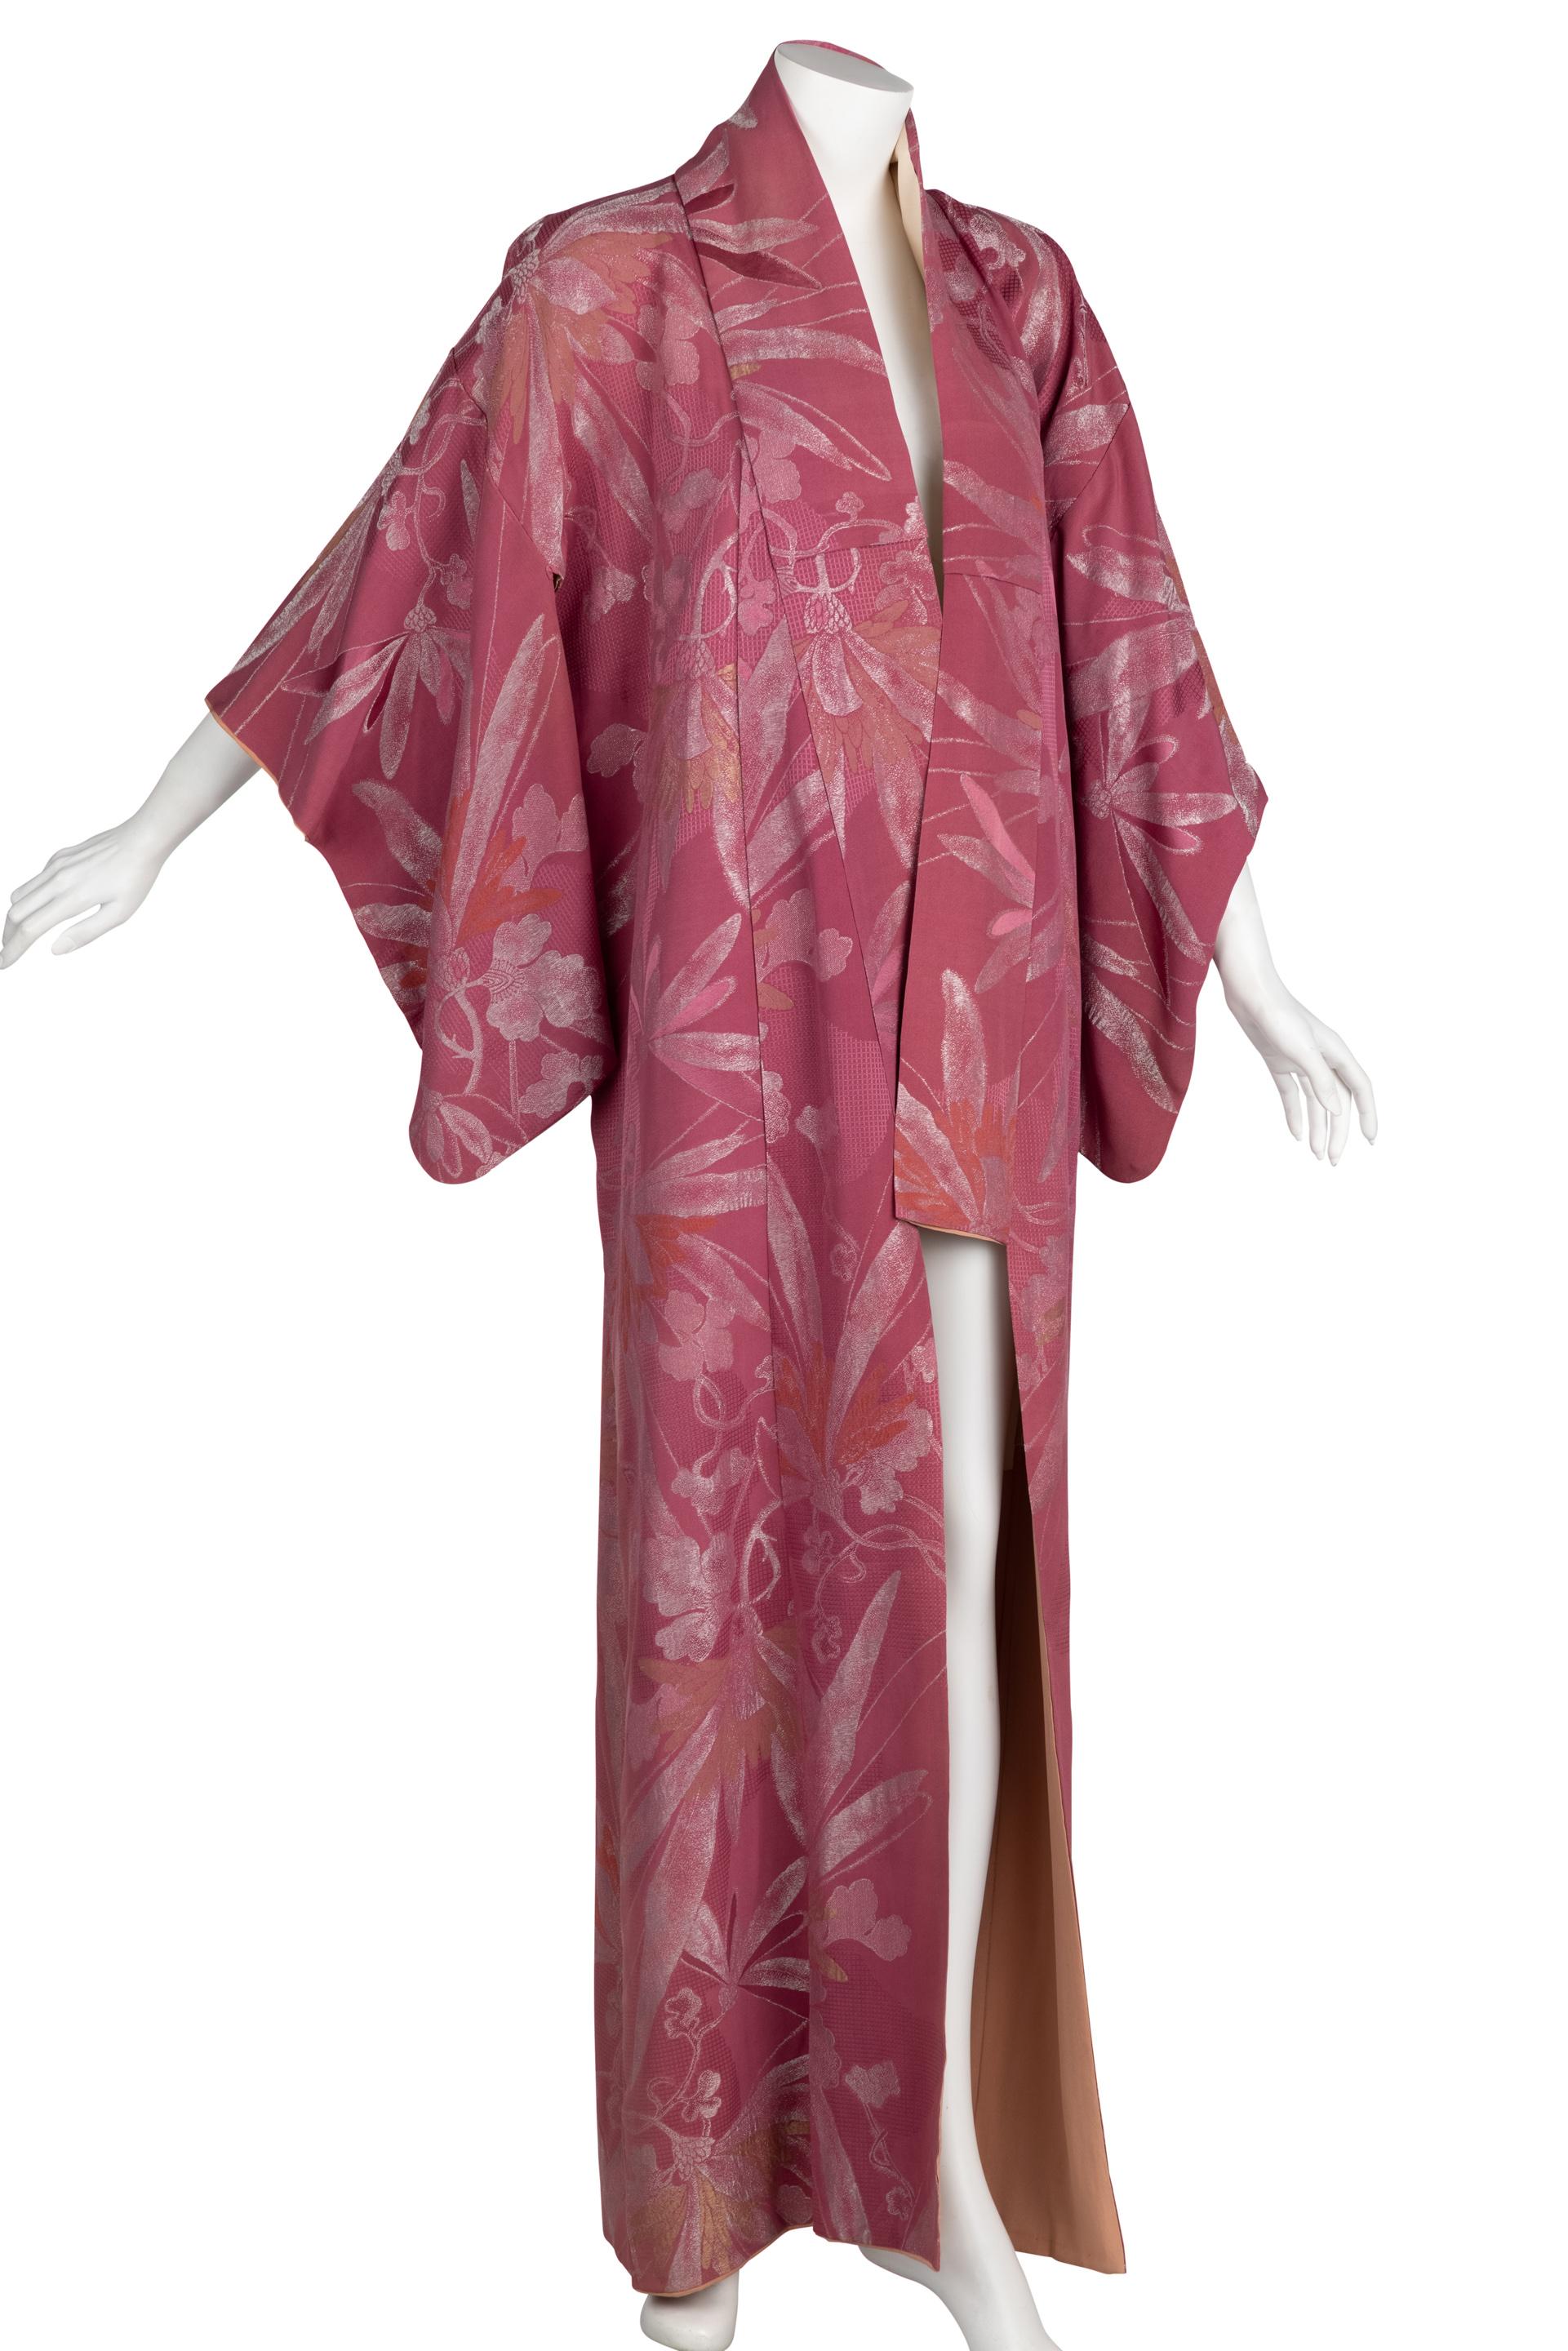 The traditional dress of Japan, kimonos are beloved worldwide for their beauty, rich history, and distinctive silhouette. Constructed from silk or other fine fabrics, kimonos often showcase embroidered elements from nature such as florals, birds, or